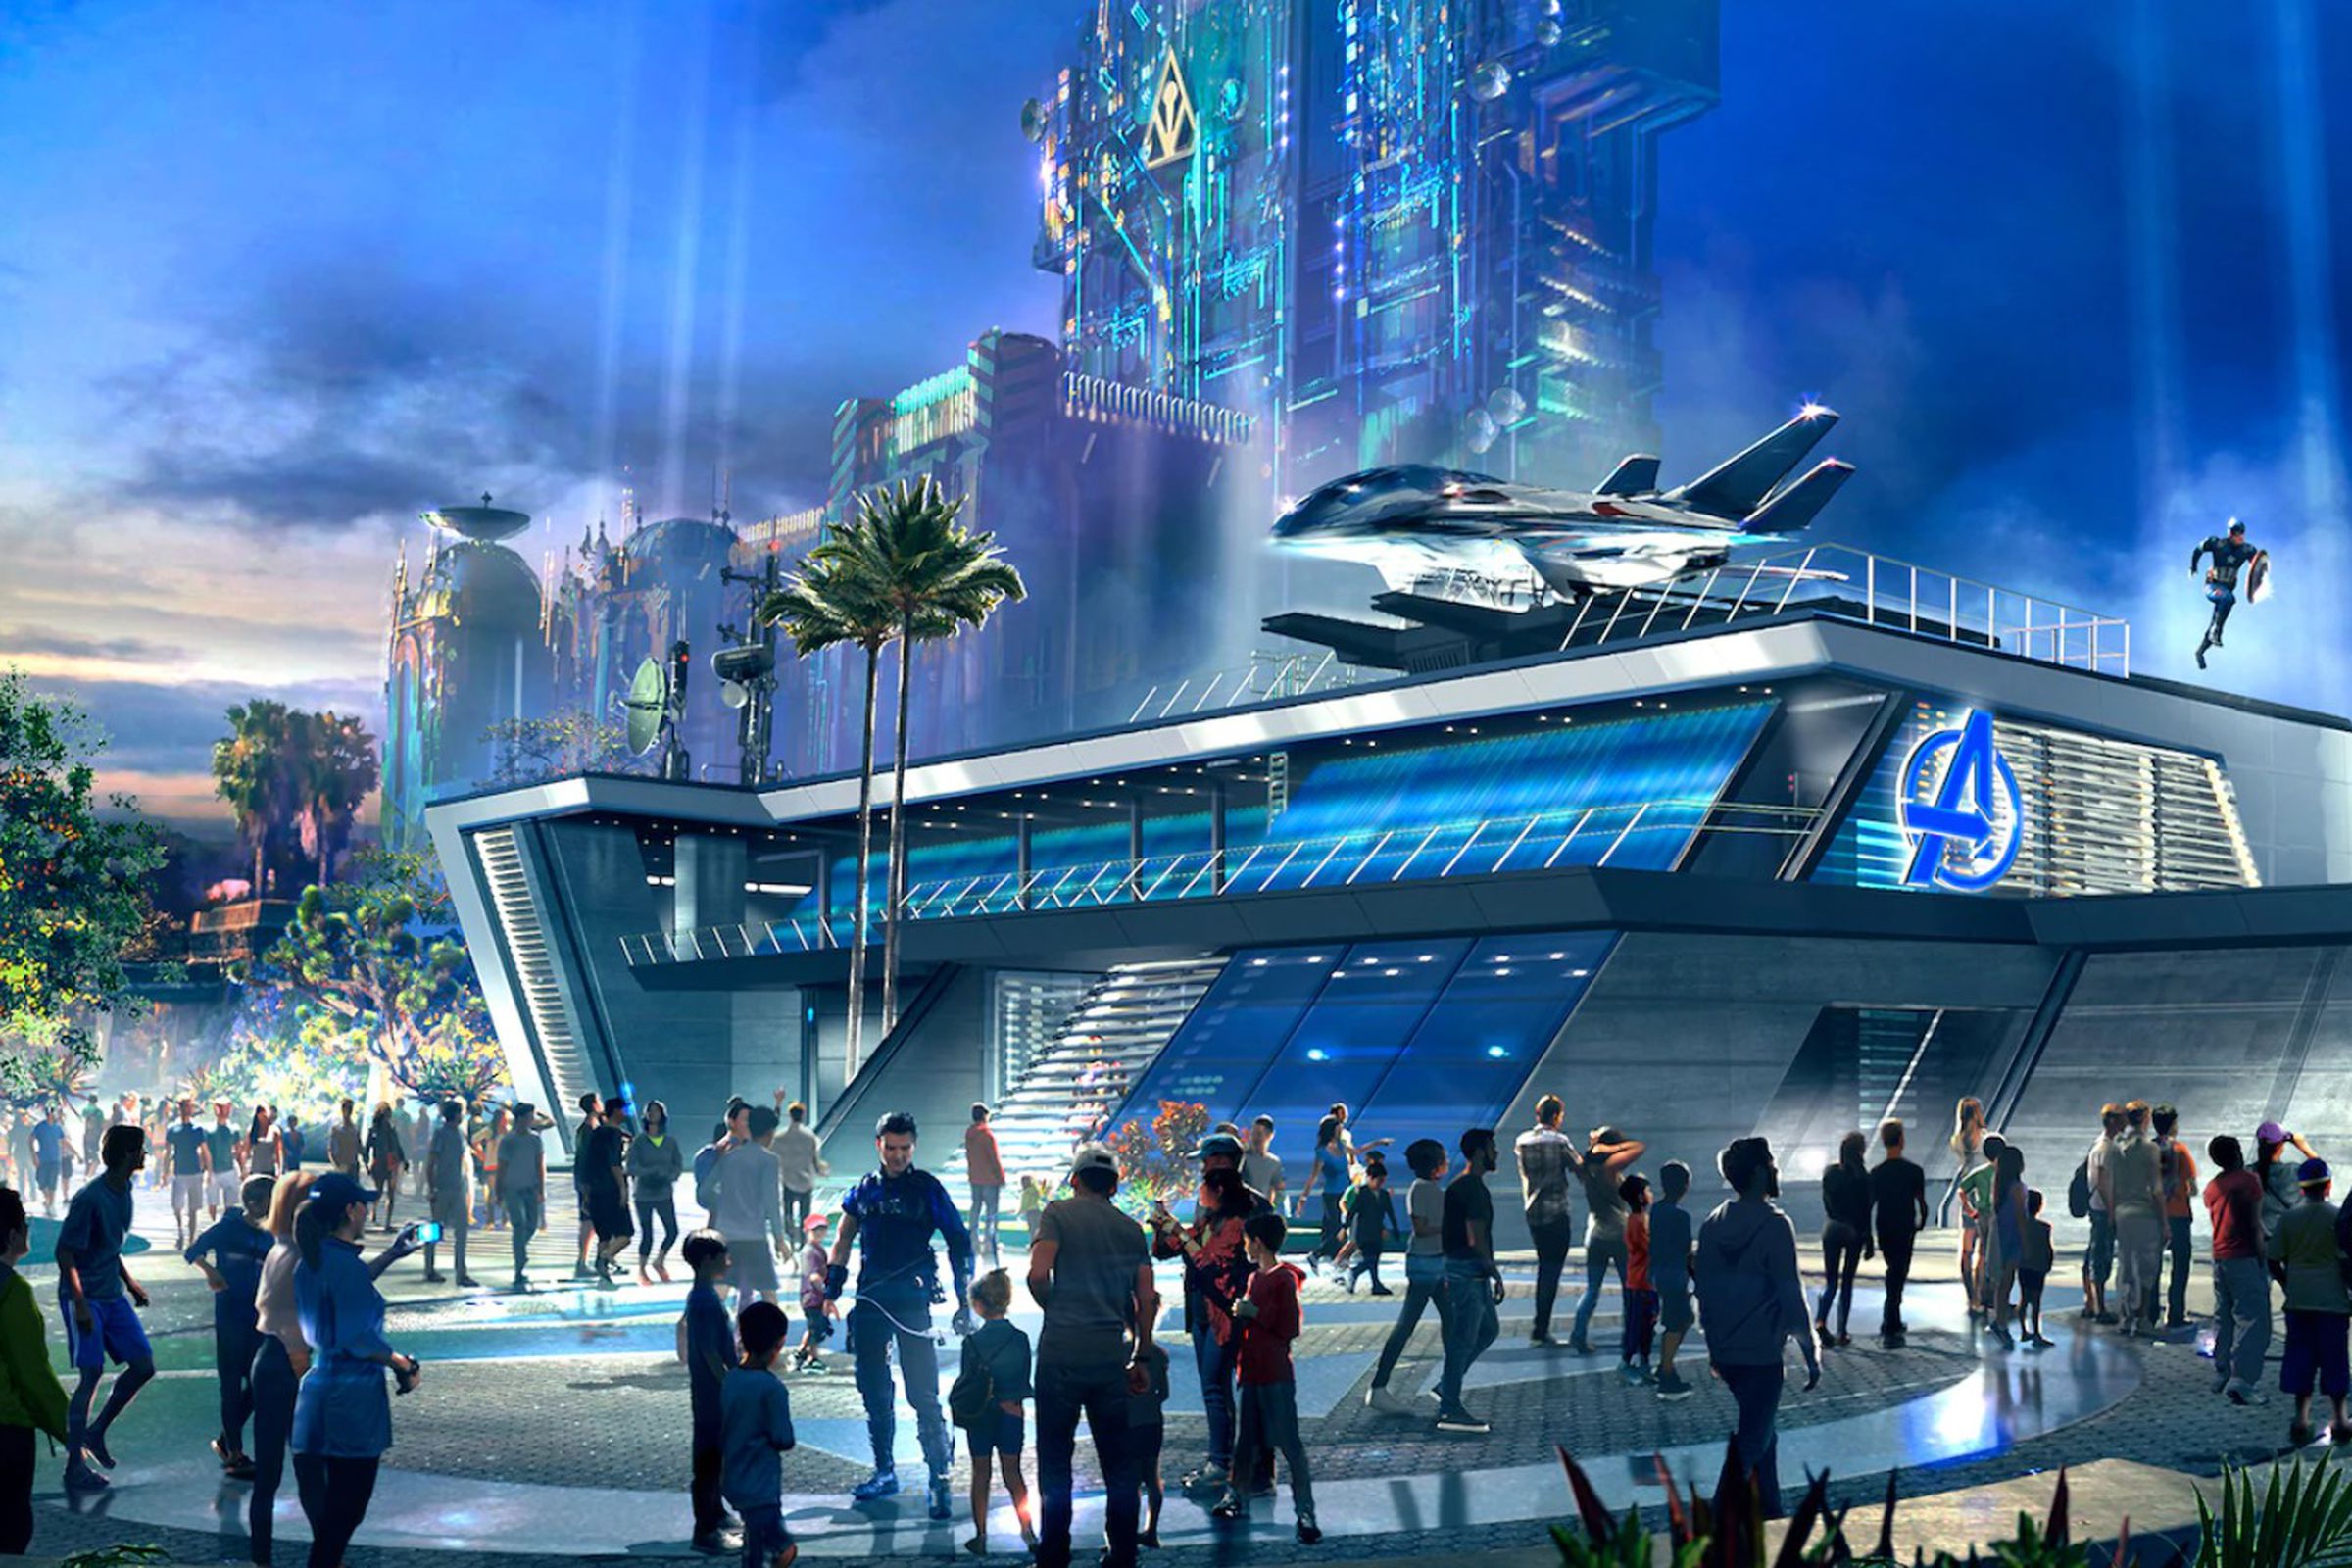 An artist’s rendering of the new Avengers headquarters at Disney California Adventure